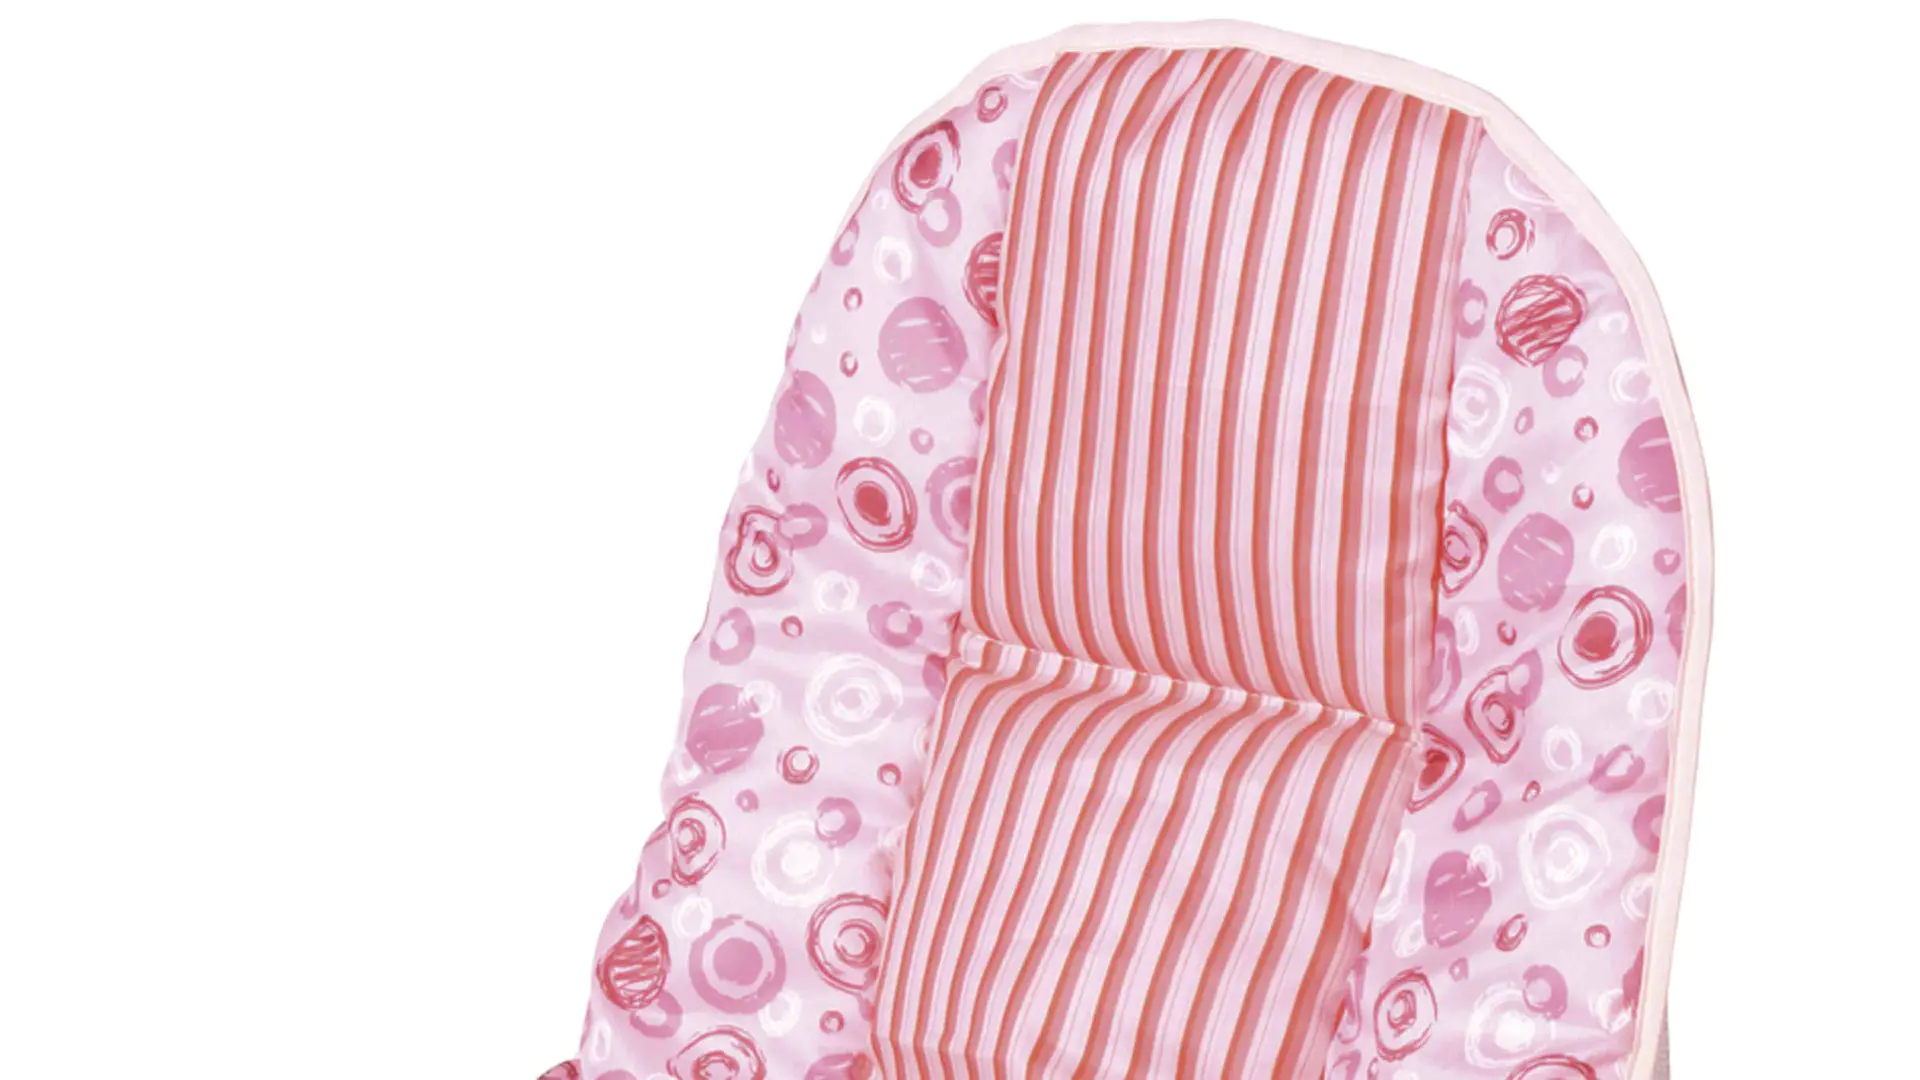 Aoqi comfortable unisex baby bouncer supplier for bedroom